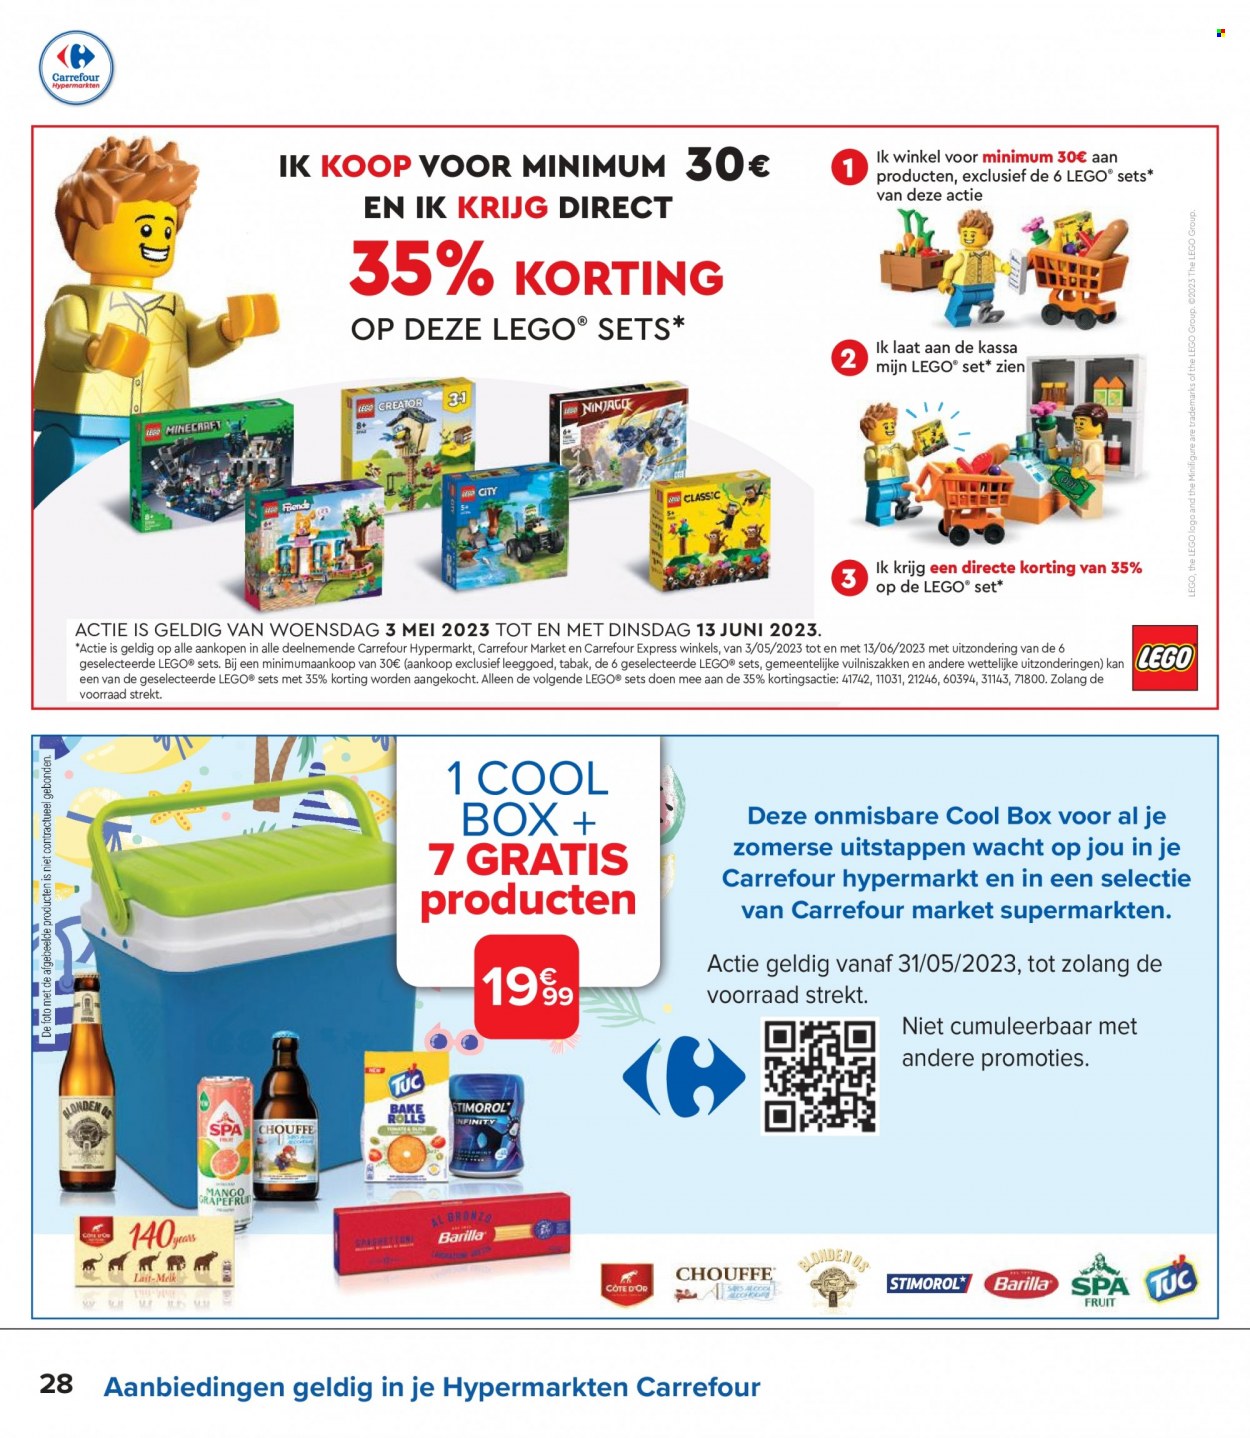 Catalogue Carrefour hypermarkt - 31.5.2023 - 12.6.2023. Page 28.